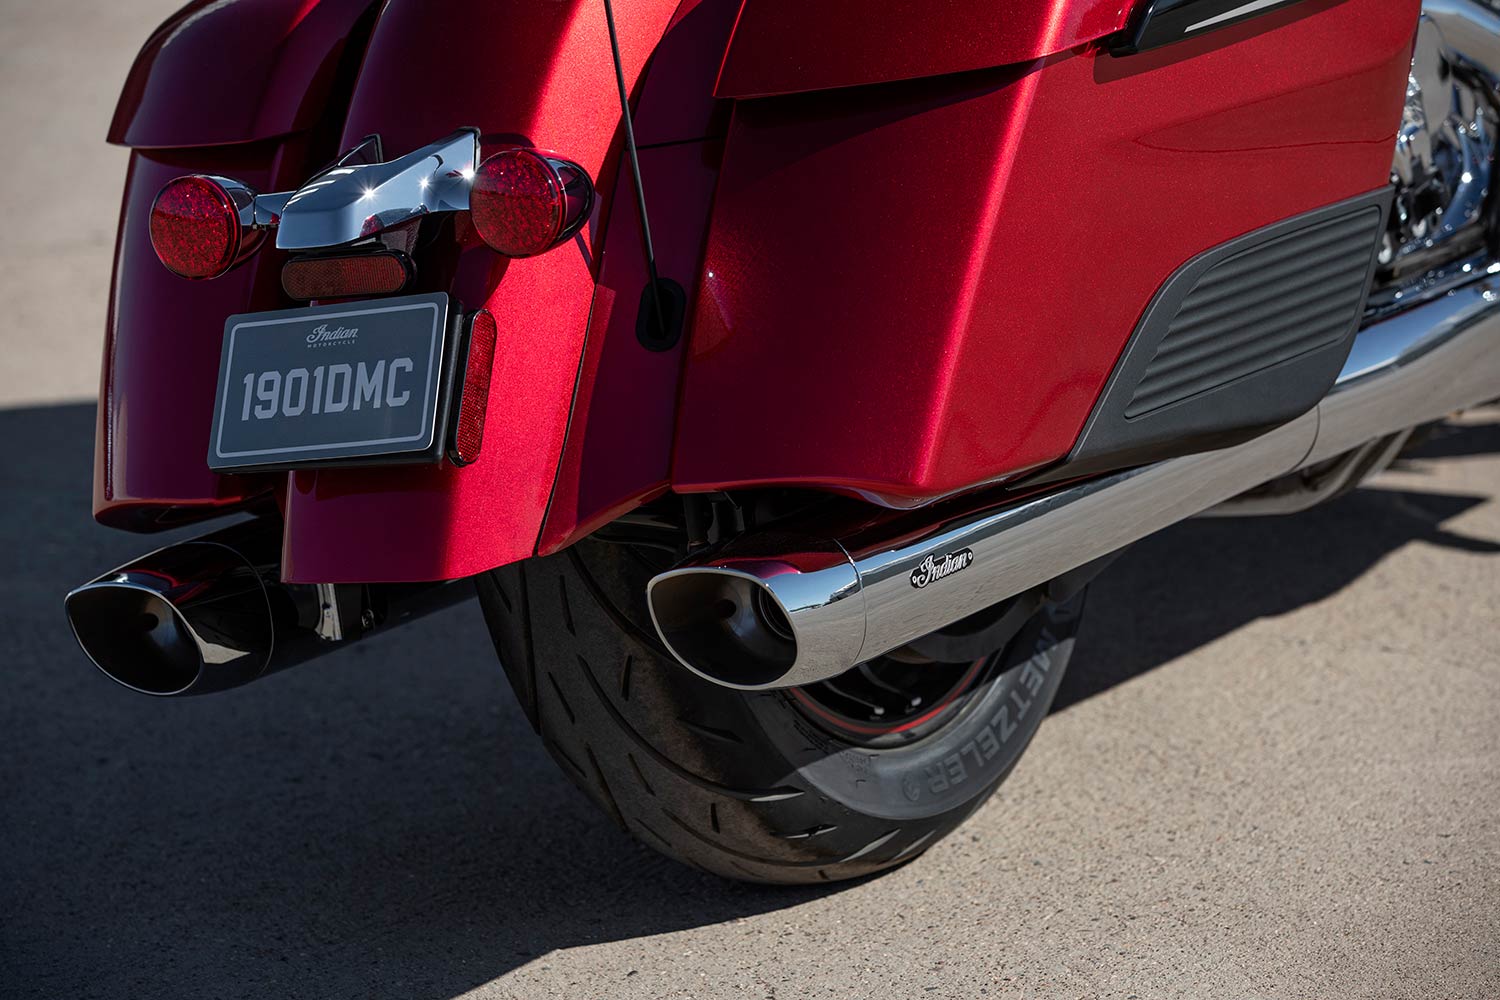 Exhaust tips on the 2020 Challenger Limited.